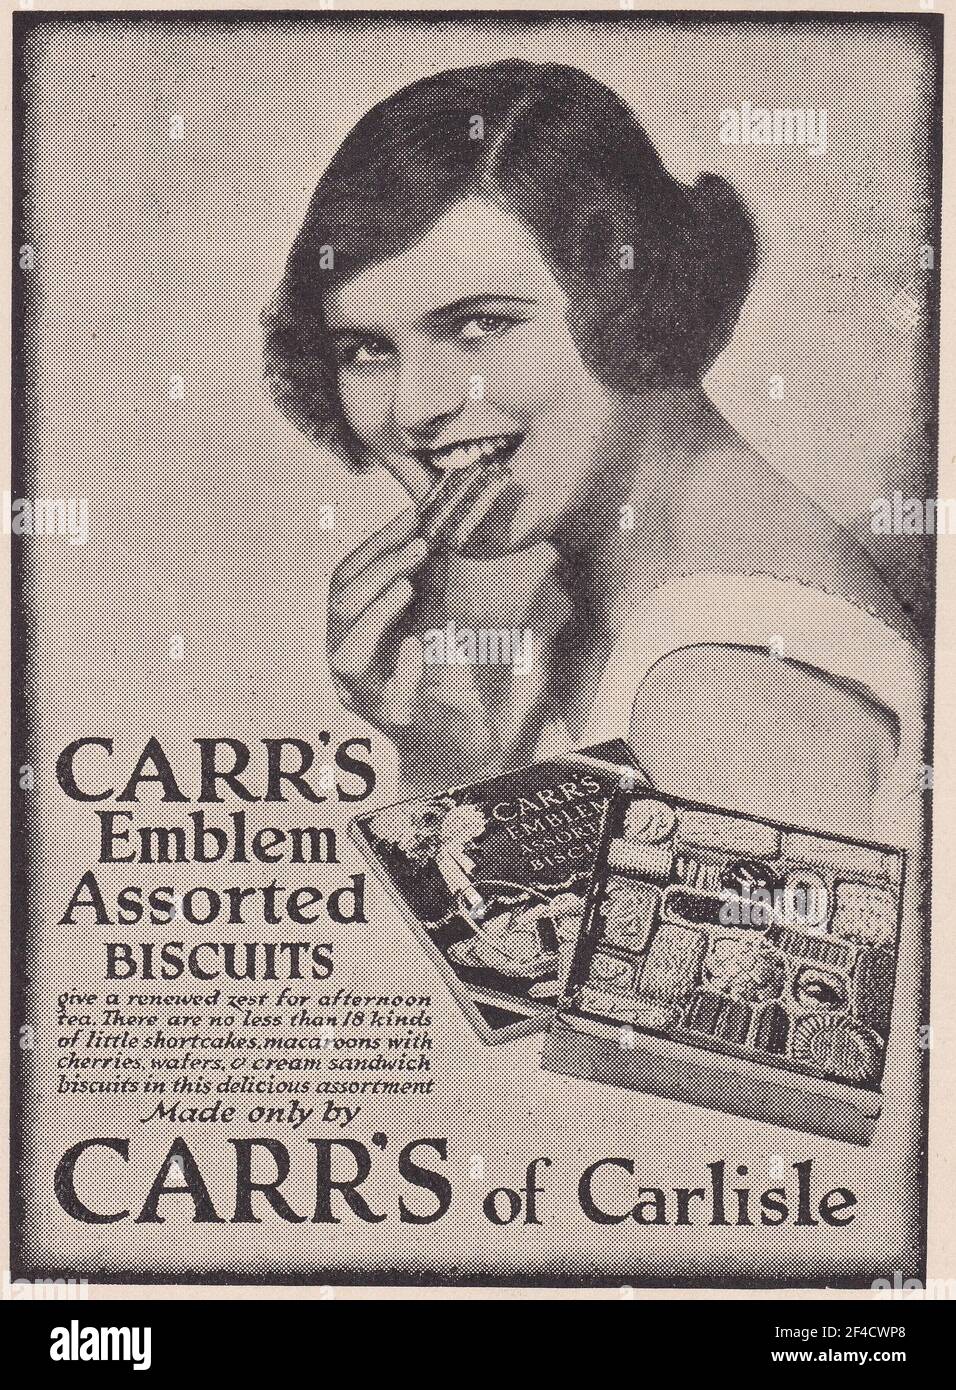 Vintage advert for Carr's of Carlisle - Carr's Emblem Assorted Biscuits. Stock Photo